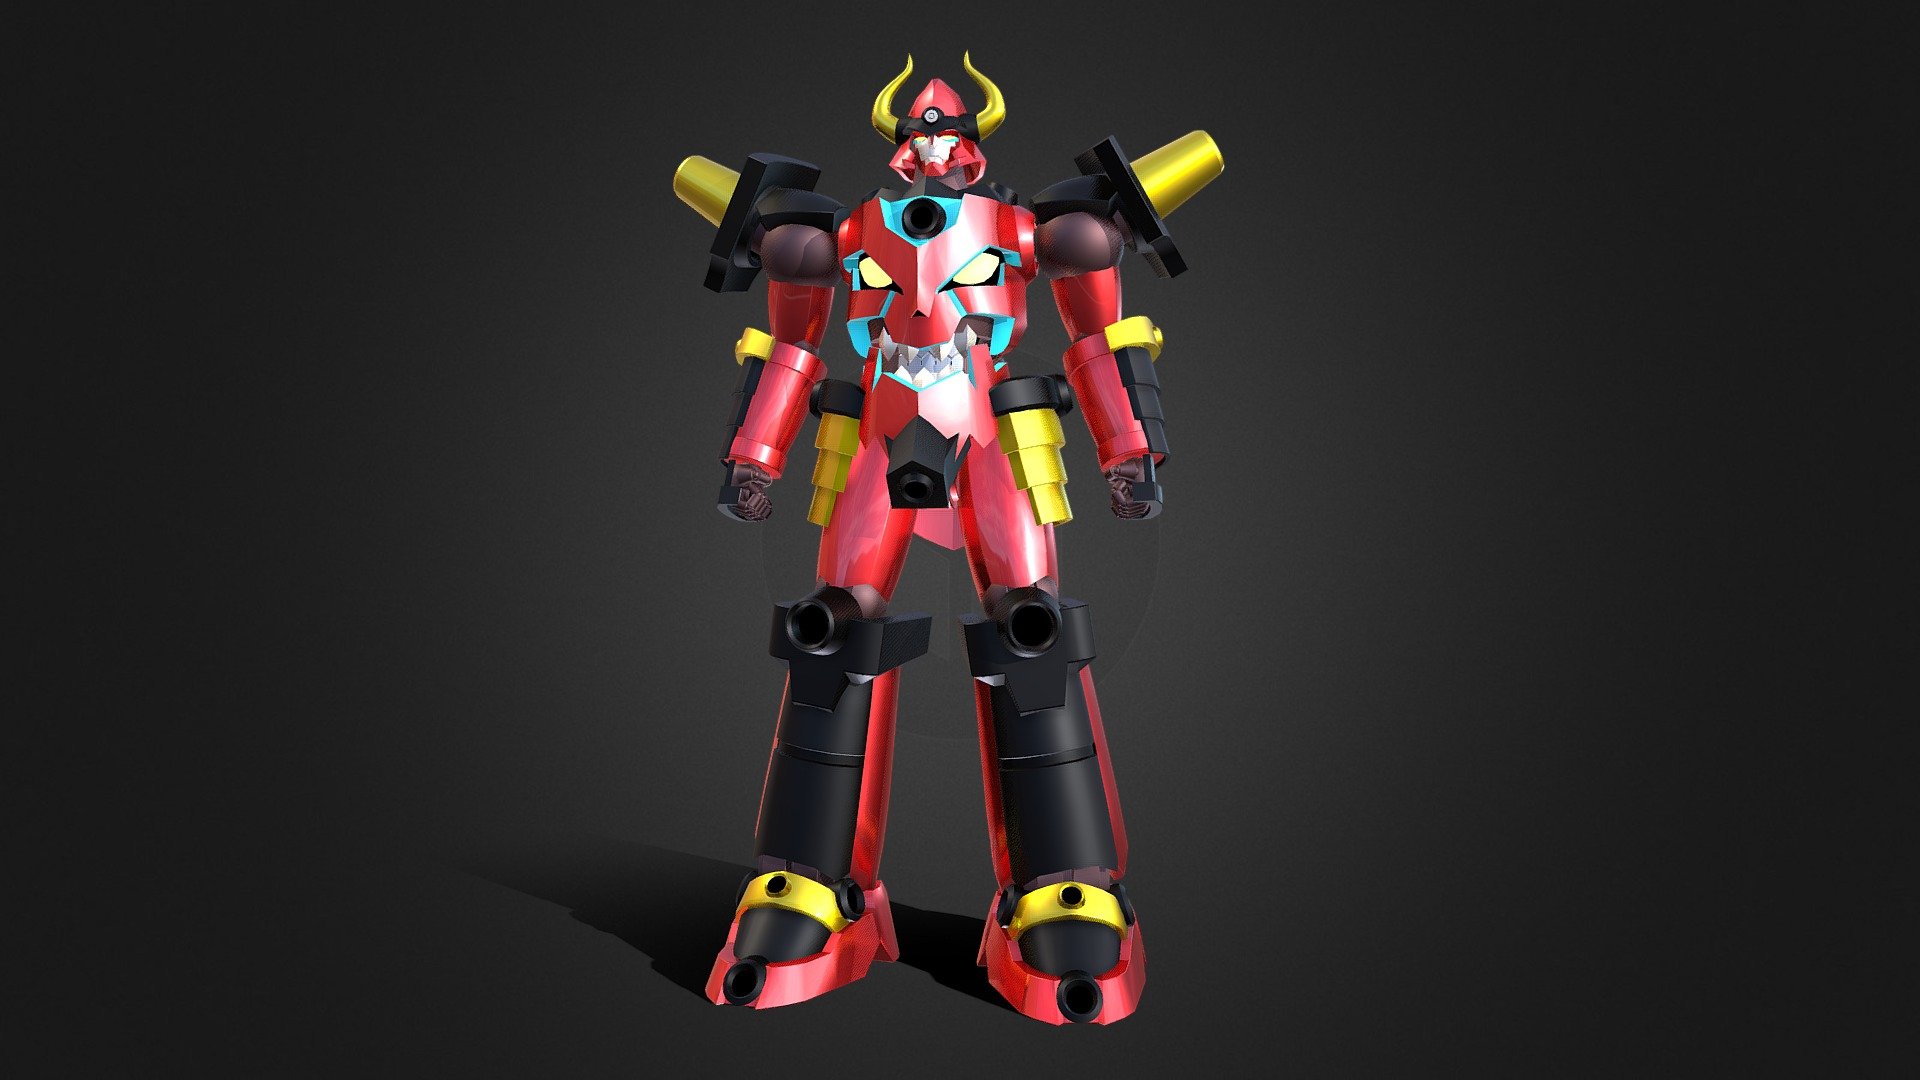 If you're interested in purchasing any of my models, contact me @ andrewdisaacs@yahoo.com

An alternate version of Gurren Lagann from a parallel universe from the anime Tengen Toppa Gurren Lagann Parallel Works.

Made in 3DS Max by myself 3d model